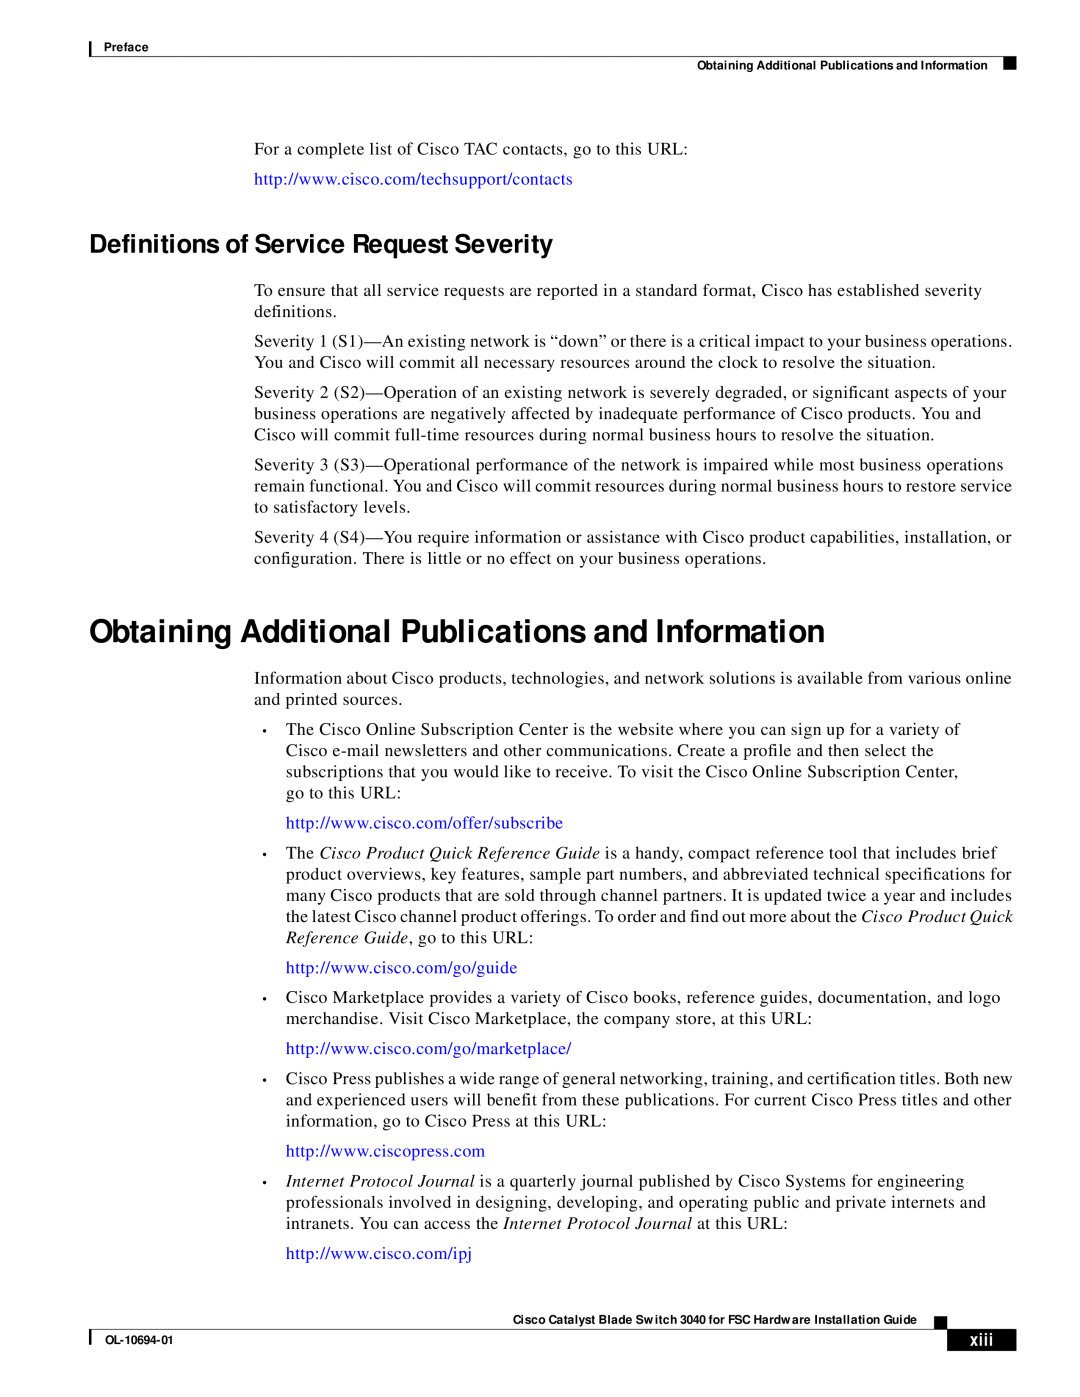 3D Connexion OL-10694-01 Obtaining Additional Publications and Information, Definitions of Service Request Severity, xiii 